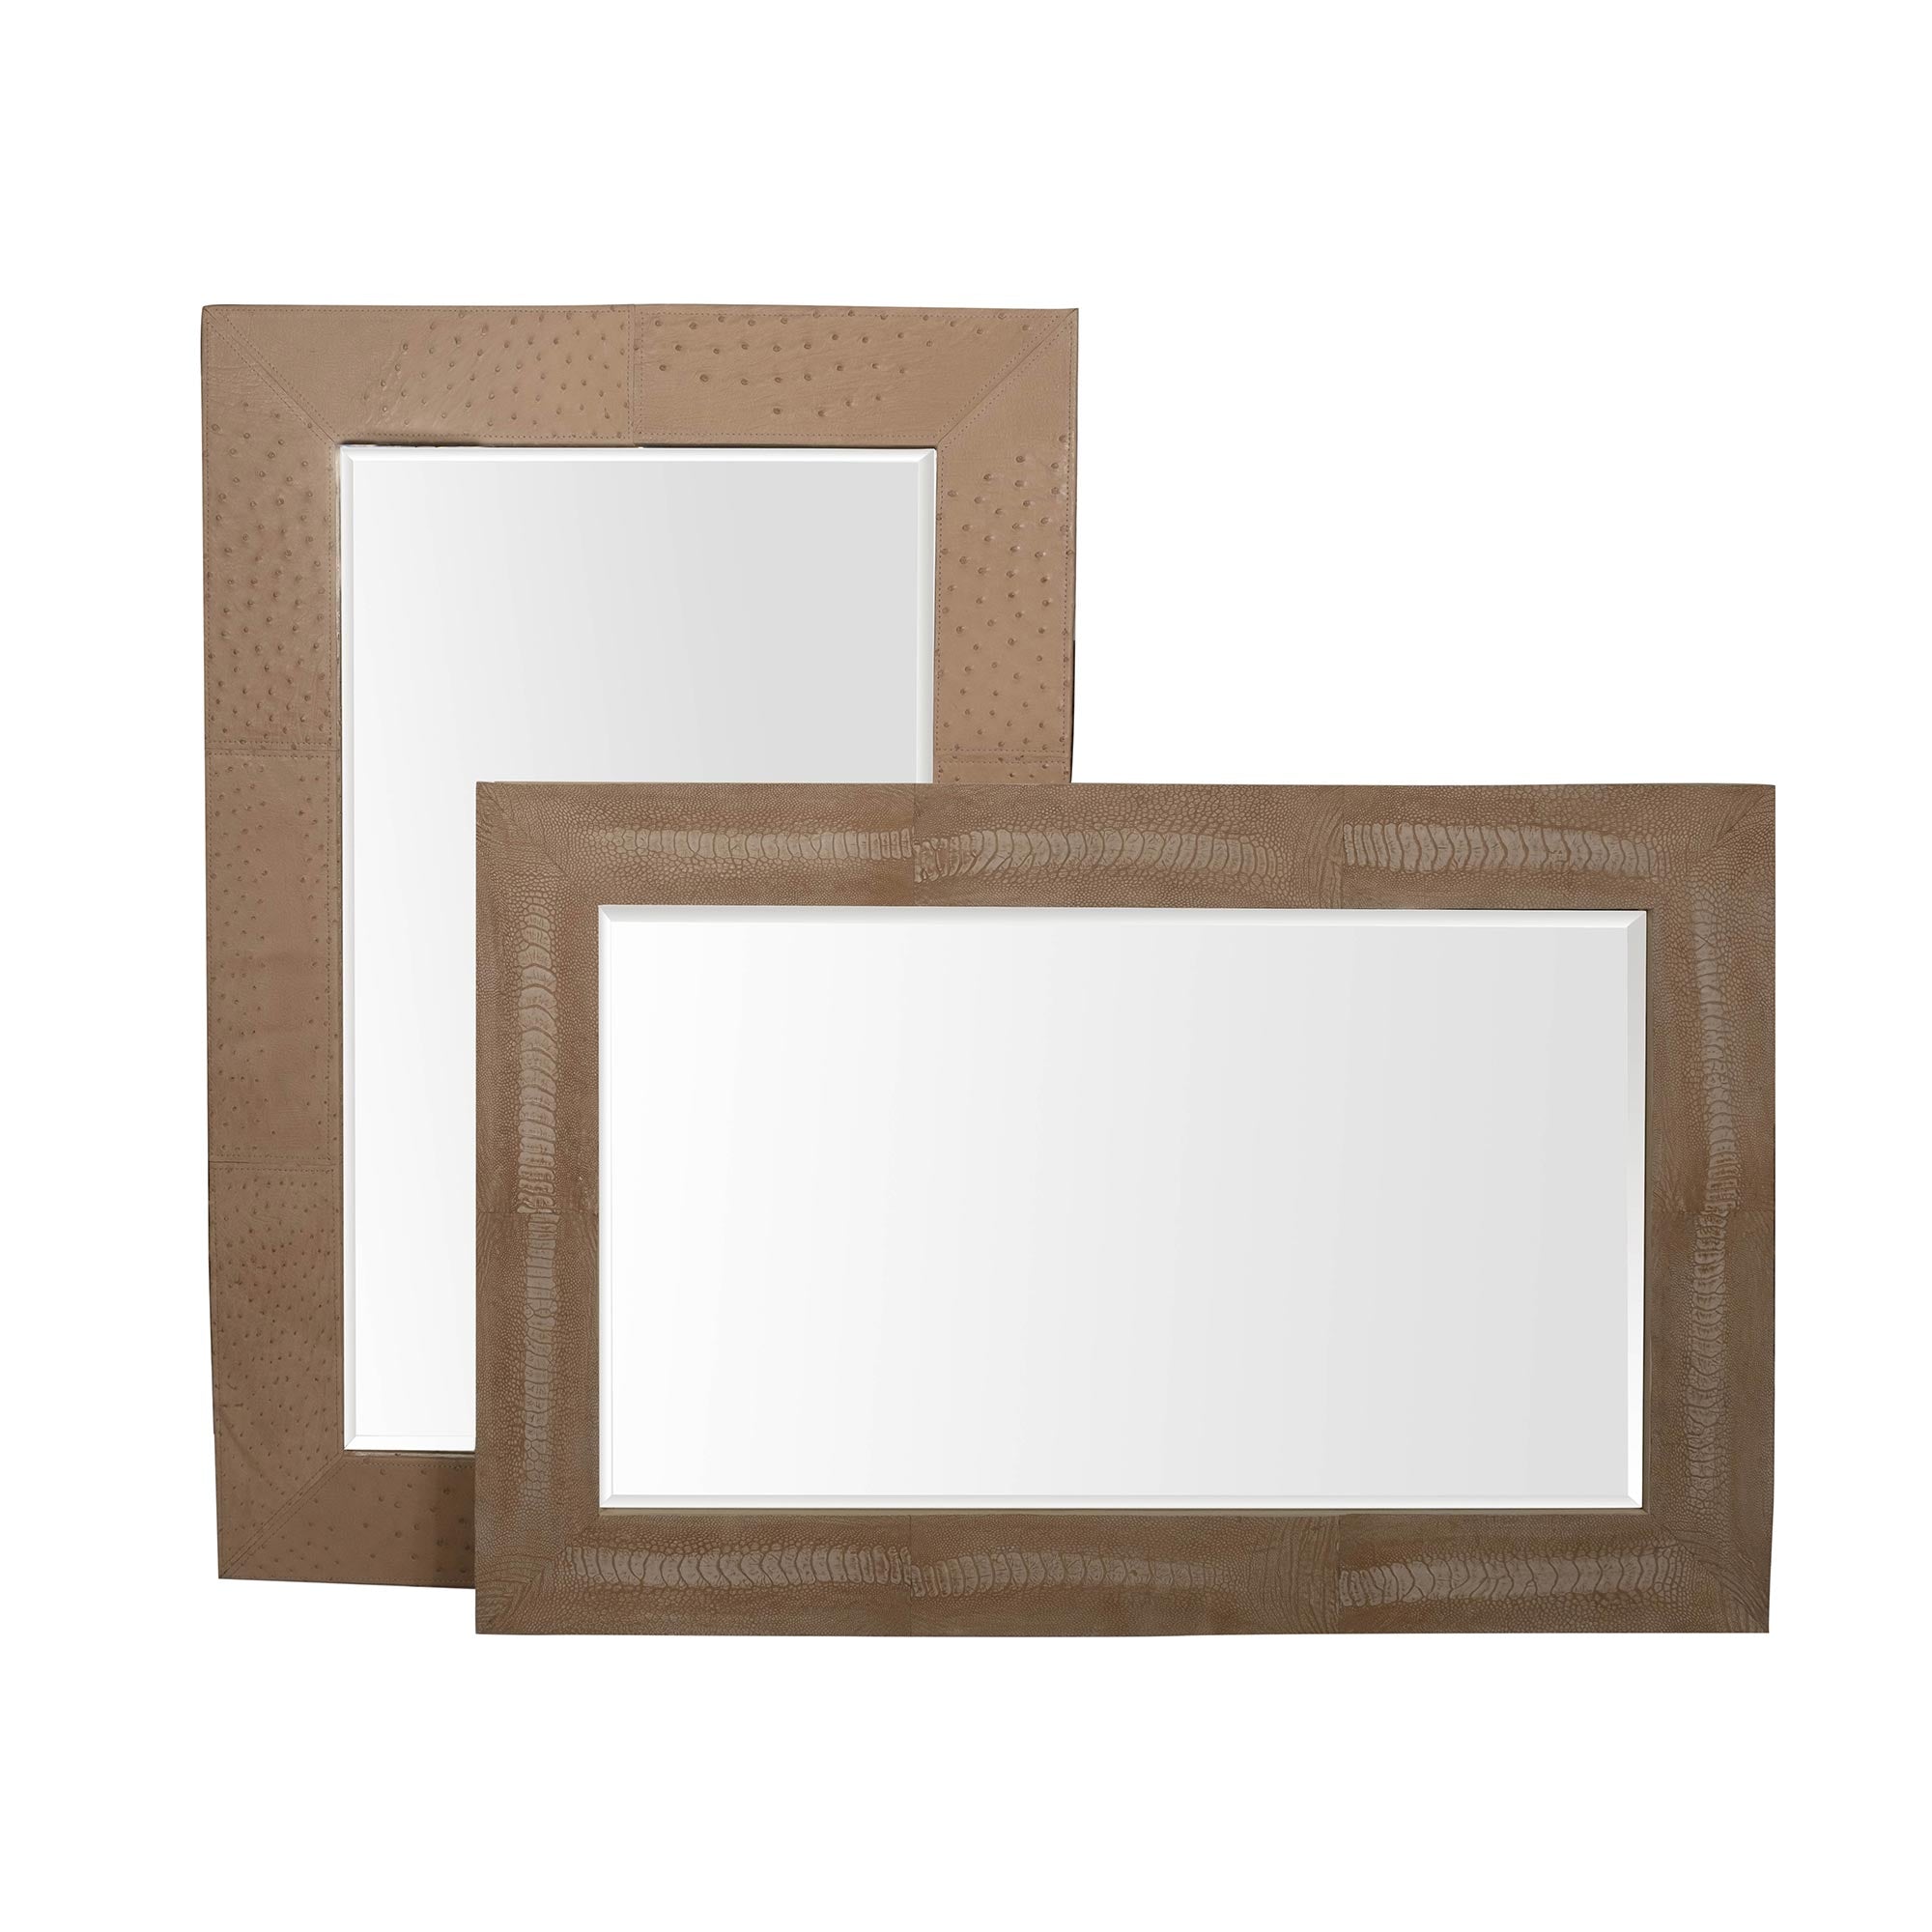 Ostrich Shin Leather Rectangle Mirror - Stone Washed